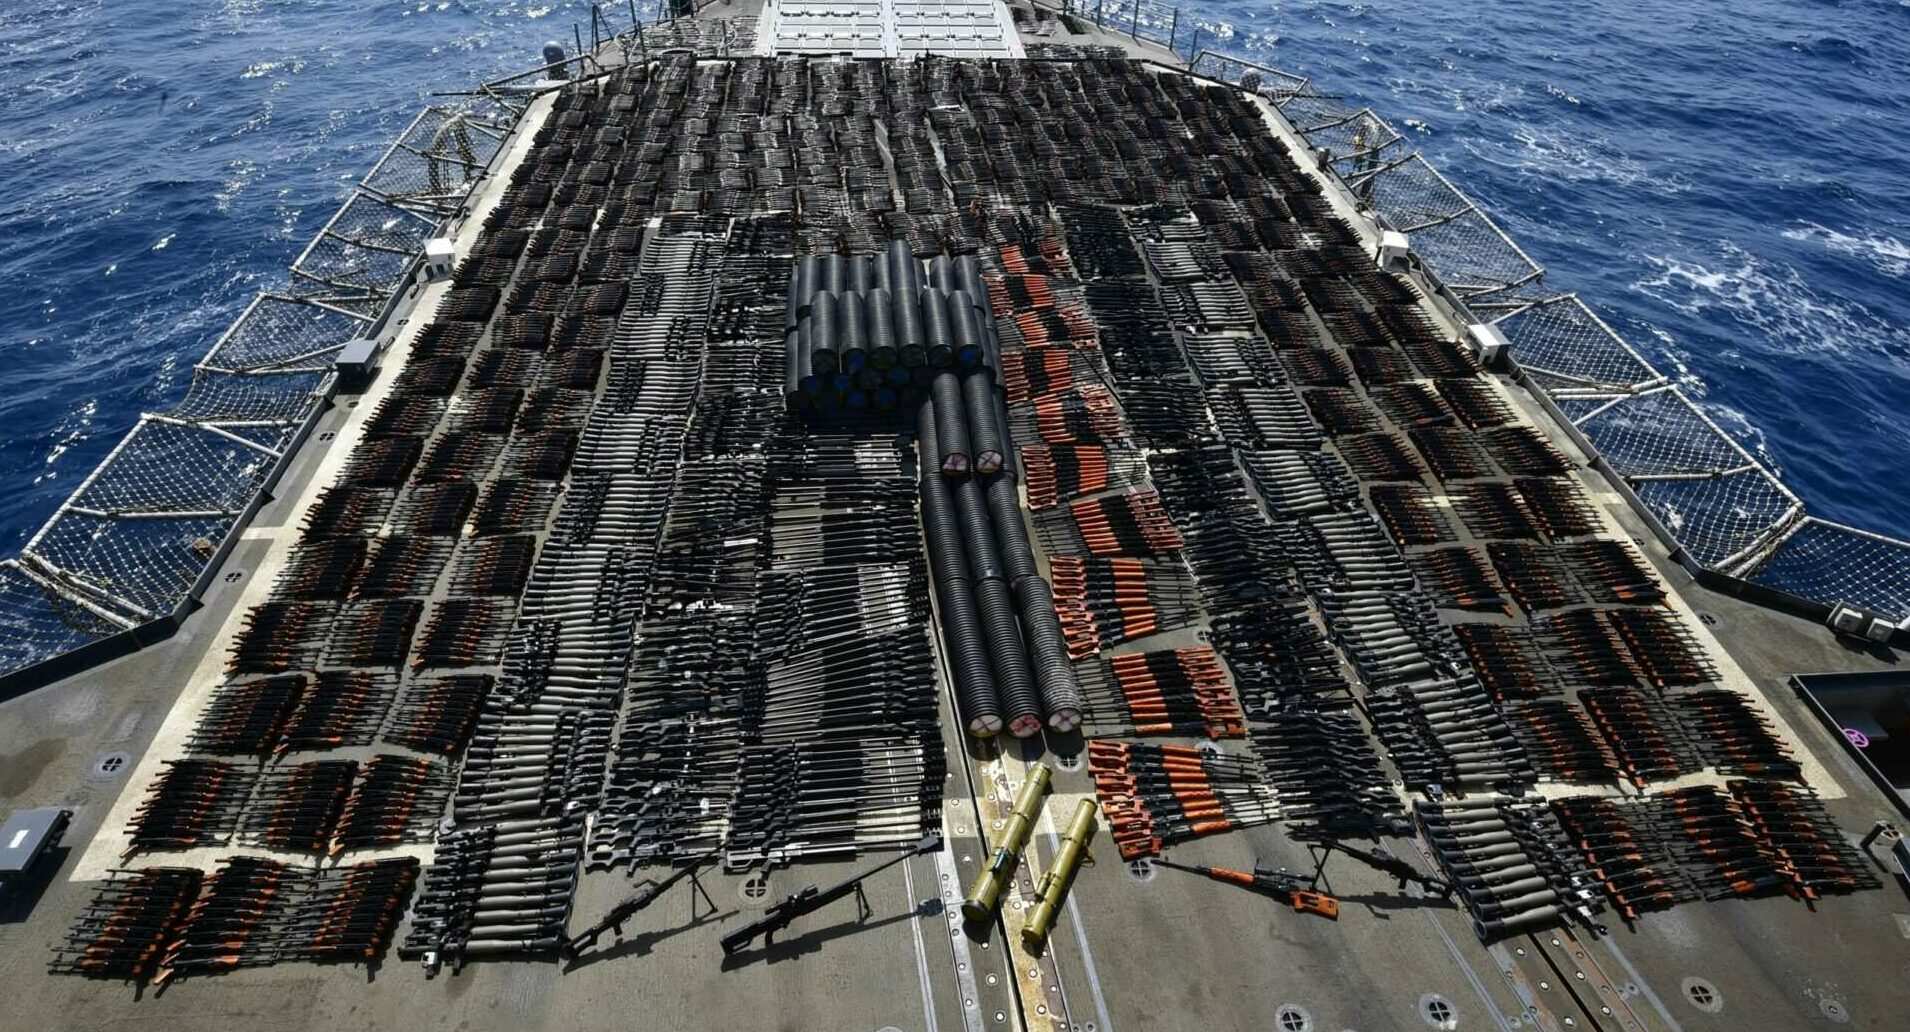 Videos: US warship seizes thousands of Chinese, Russian weapons likely